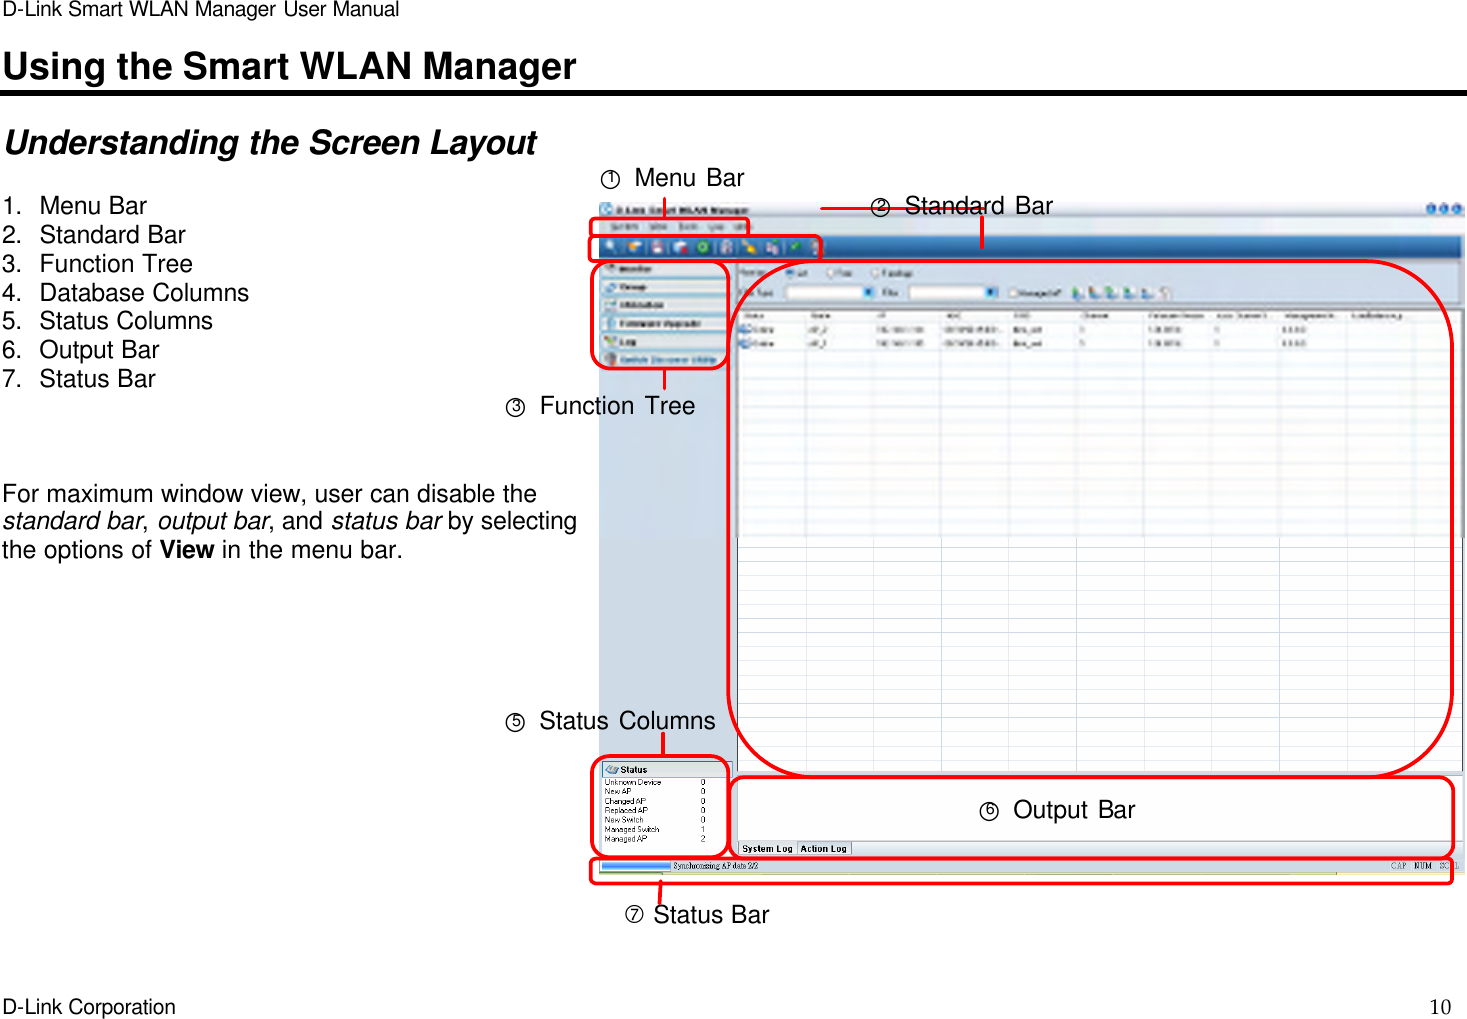 D-Link Smart WLAN Manager User Manual  D-Link Corporation    10  Using the Smart WLAN Manager  Understanding the Screen Layout  1. Menu Bar 2. Standard Bar 3. Function Tree 4. Database Columns 5. Status Columns 6. Output Bar 7. Status Bar    For maximum window view, user can disable the standard bar, output bar, and status bar by selecting the options of View in the menu bar. ○1 Menu Bar ○2 Standard Bar ○3 Function Tree  ○6 Output Bar ○5 Status Columns ‡ Status Bar 